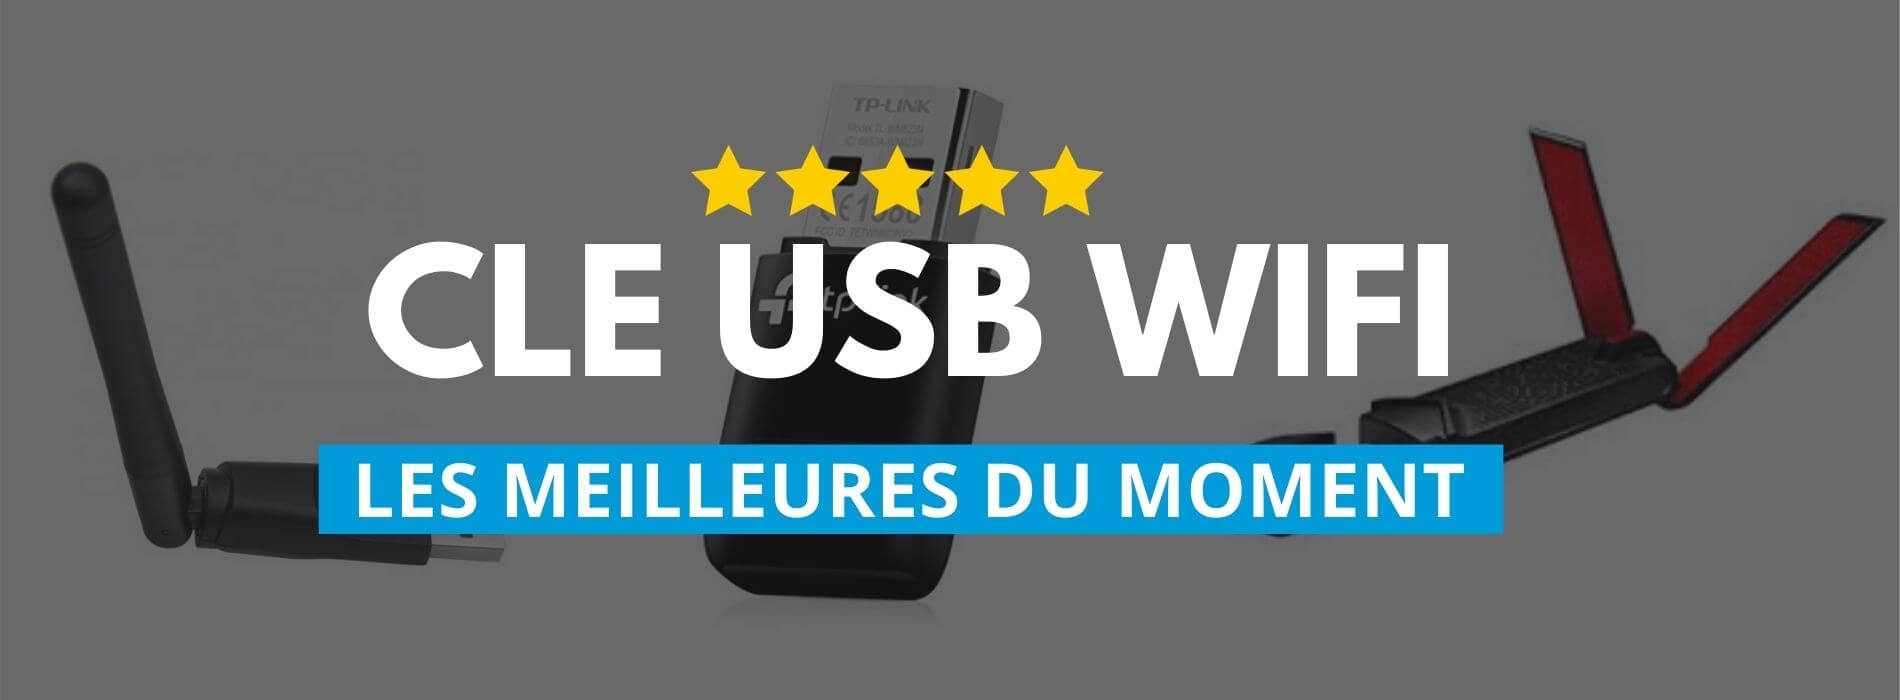 Cle wifi pour television - Cdiscount